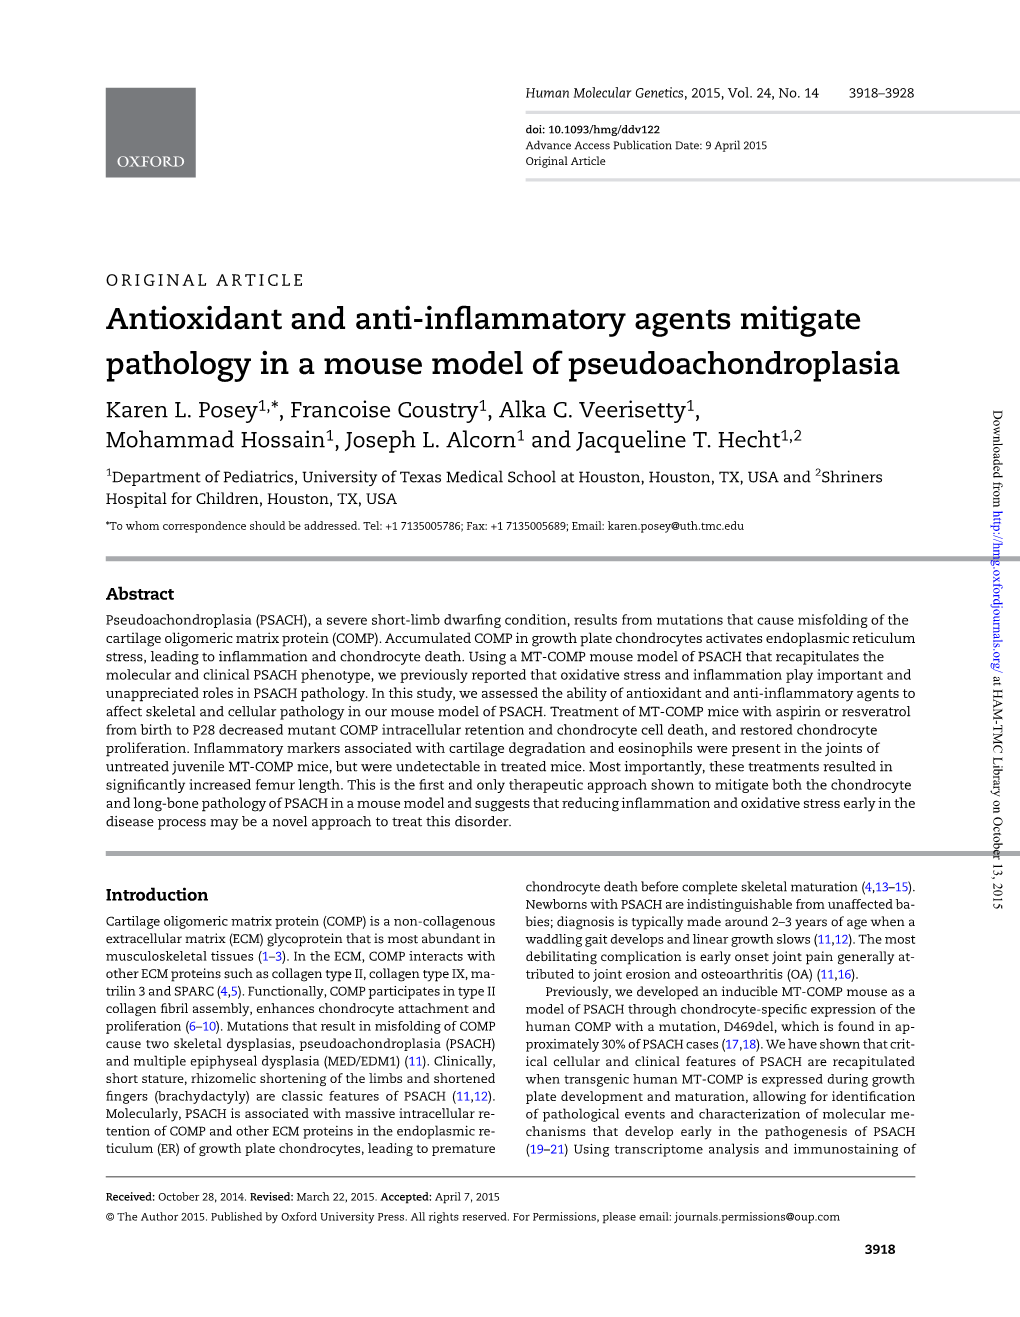 Antioxidant and Anti-Inflammatory Agents Mitigate Pathology in A